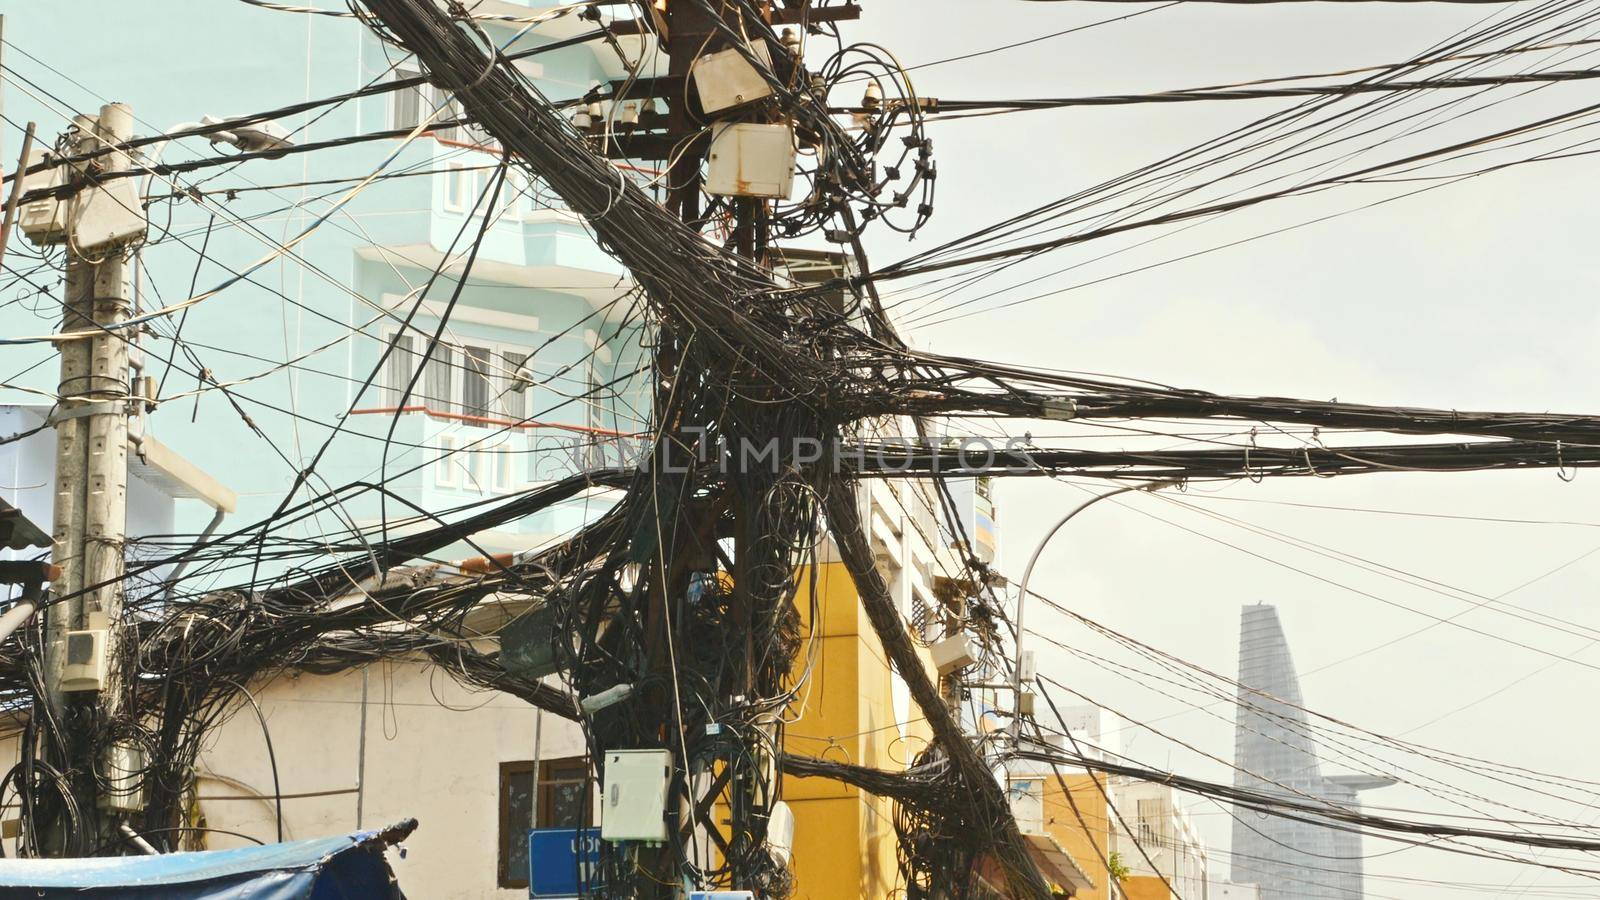 The web of power lines on the streets of Ho Chi Minh City